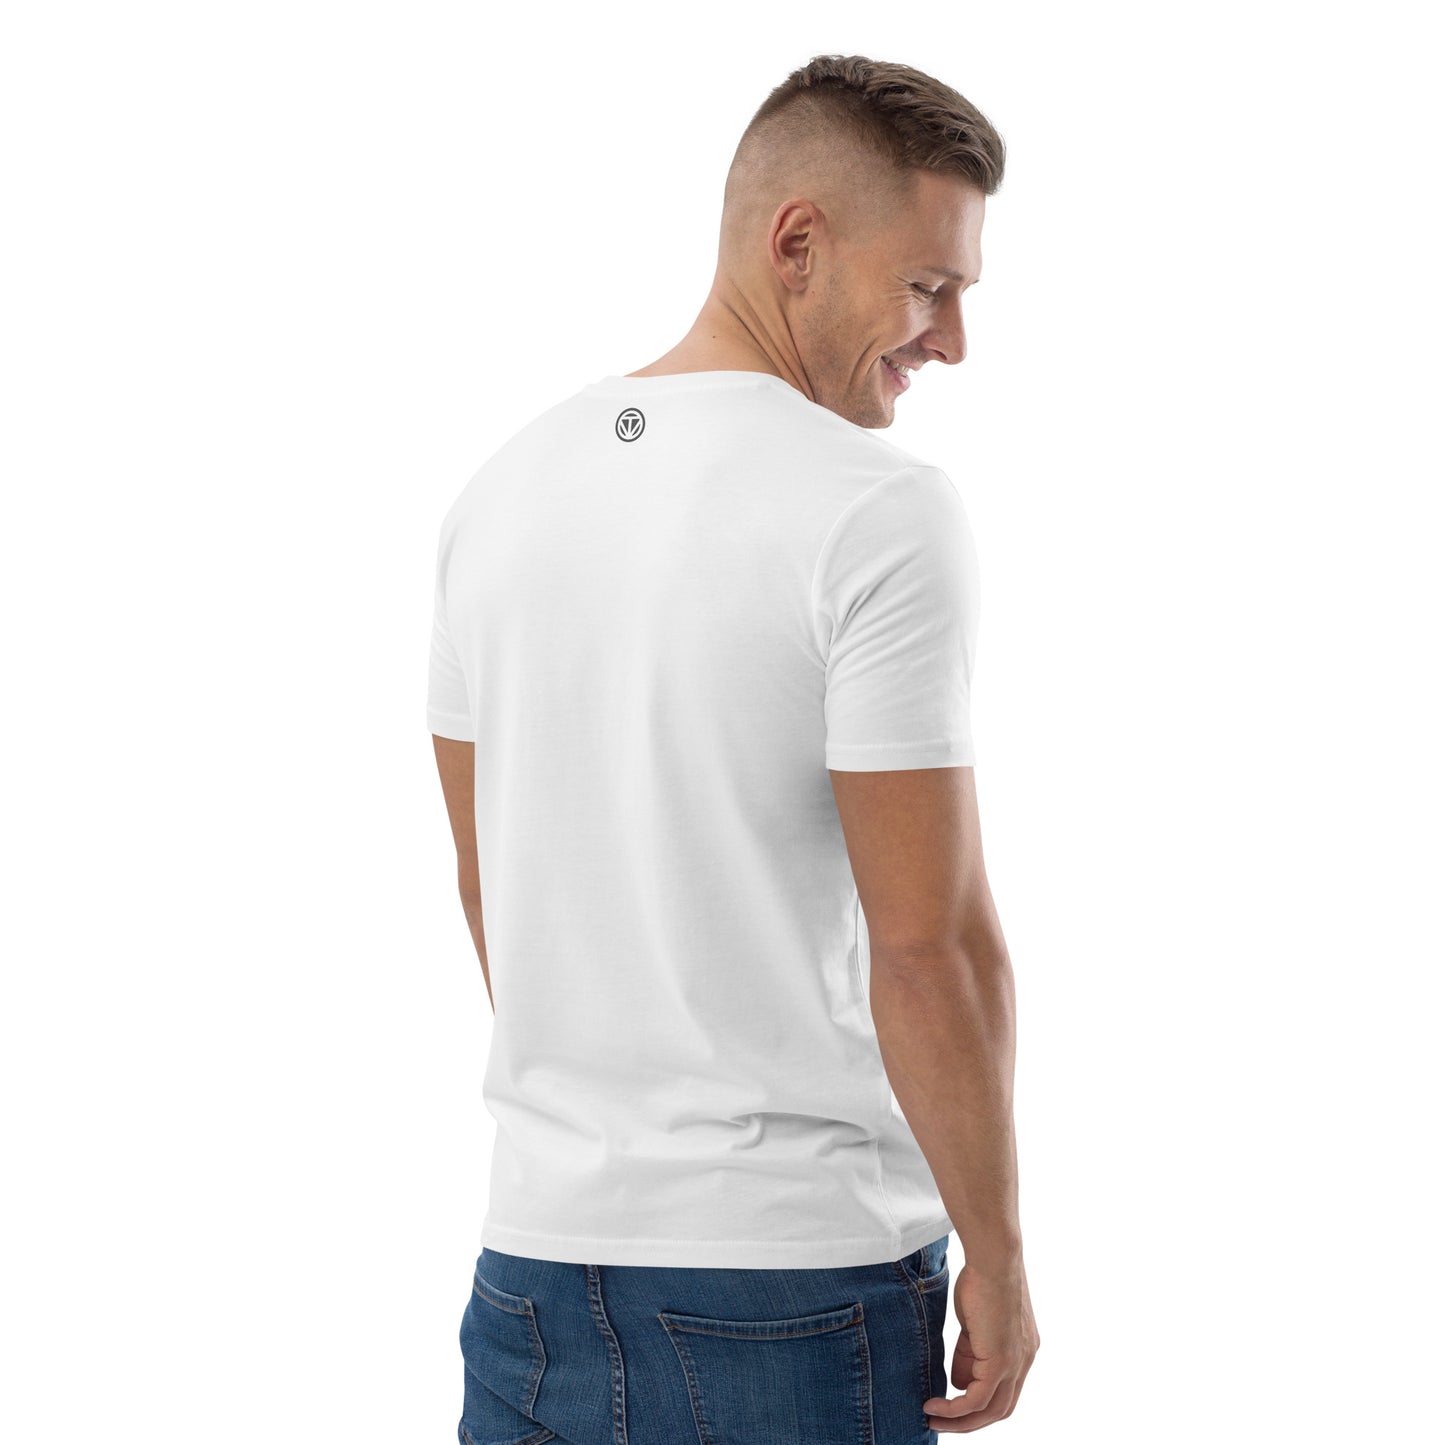 TIME OF VIBES - Organic cotton T-Shirt CURVE (White) - €32.00